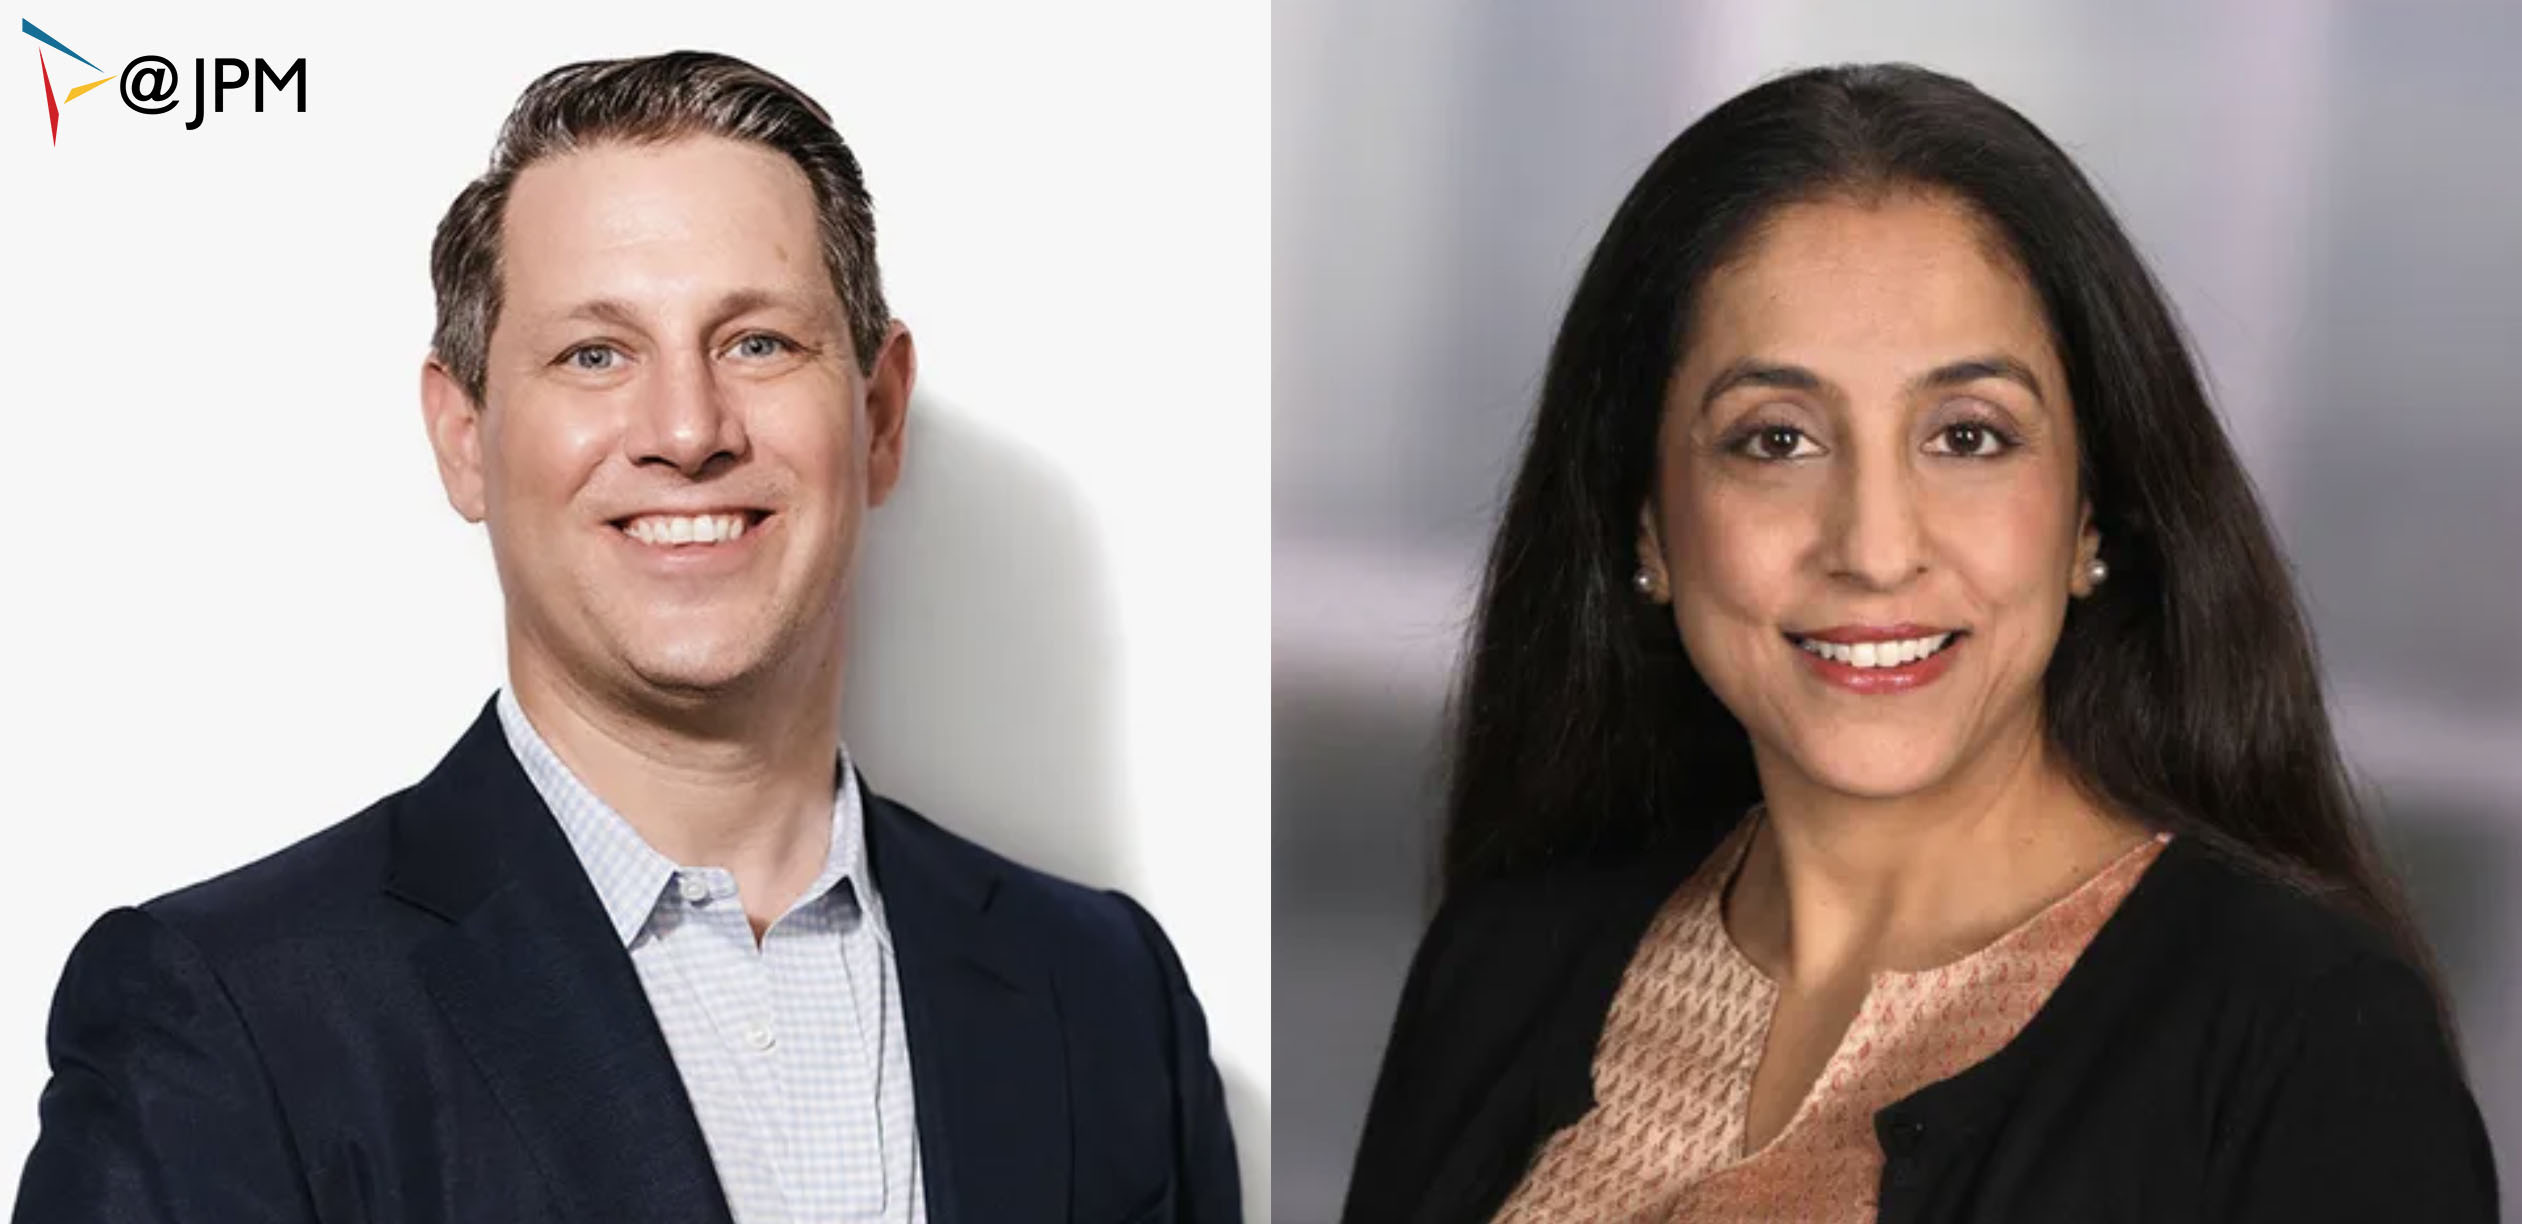 Mike Nally, CEO-Partner, Flagship Pioneering, and CEO, Generate Biomedicines, and Rachna Khosla, Senior Vice President, Business Development, Amgen